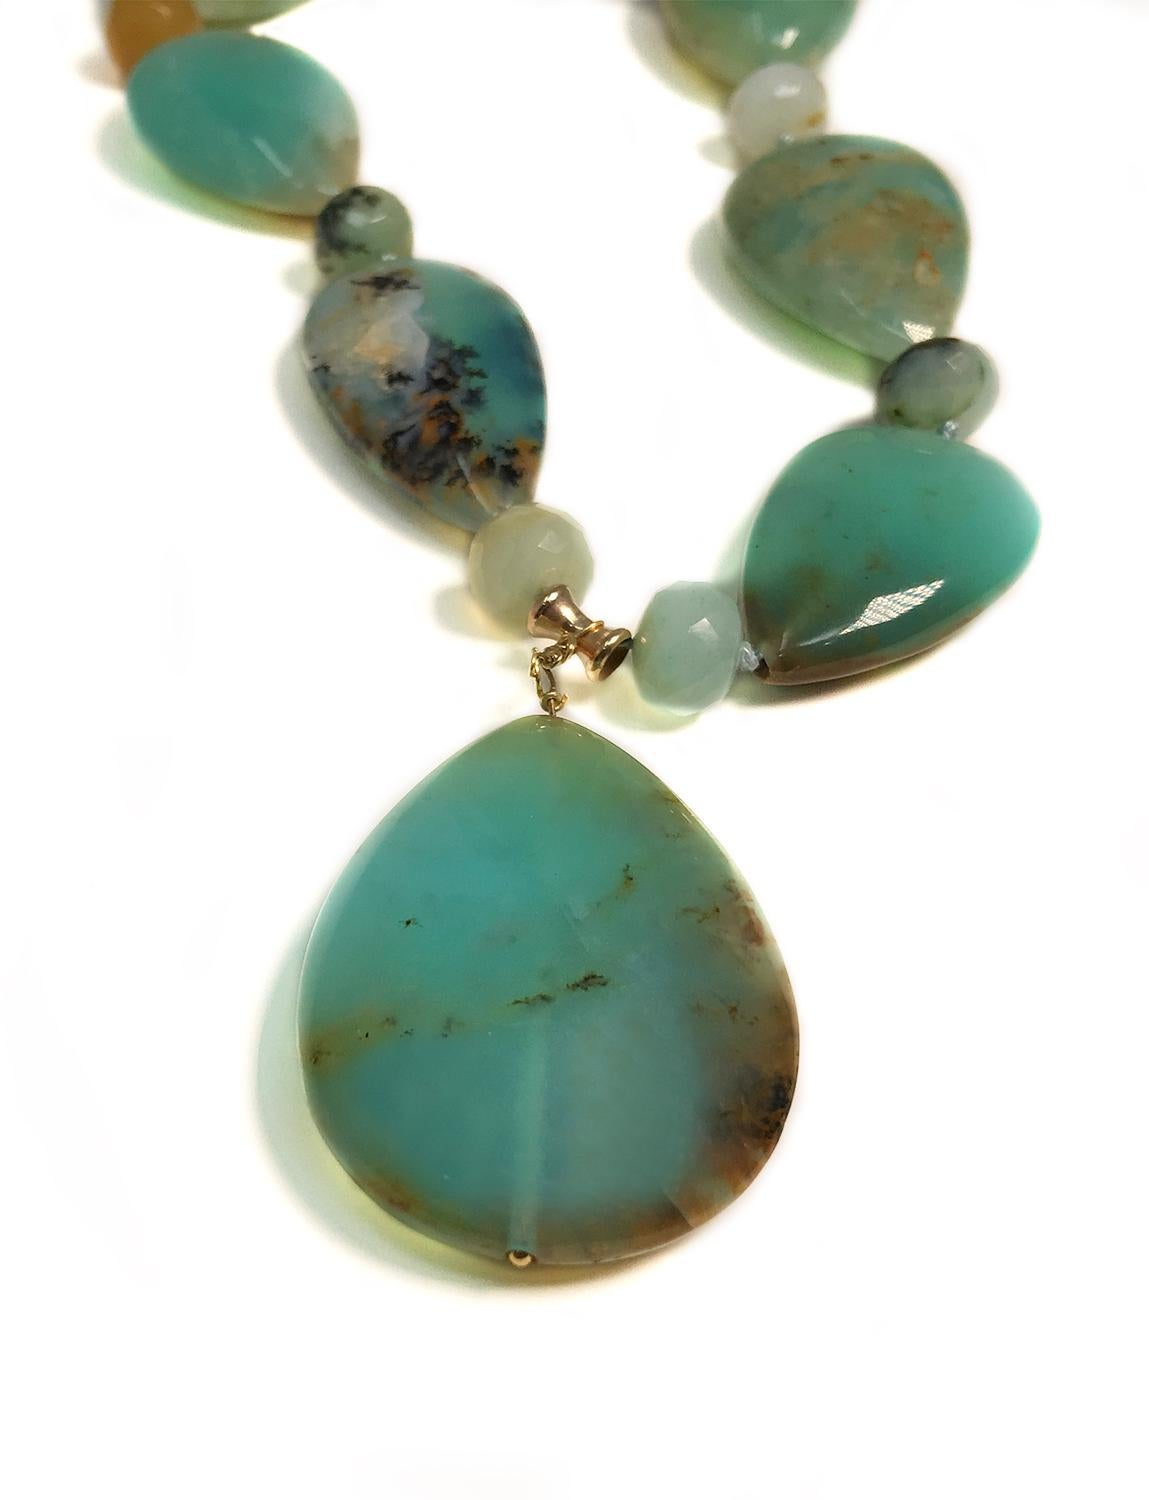 Rare Blue Green Peruvian Opals Teardrop Collar Necklace 18KT, 14KT Gold  In Excellent Condition For Sale In Newport Coast, CA